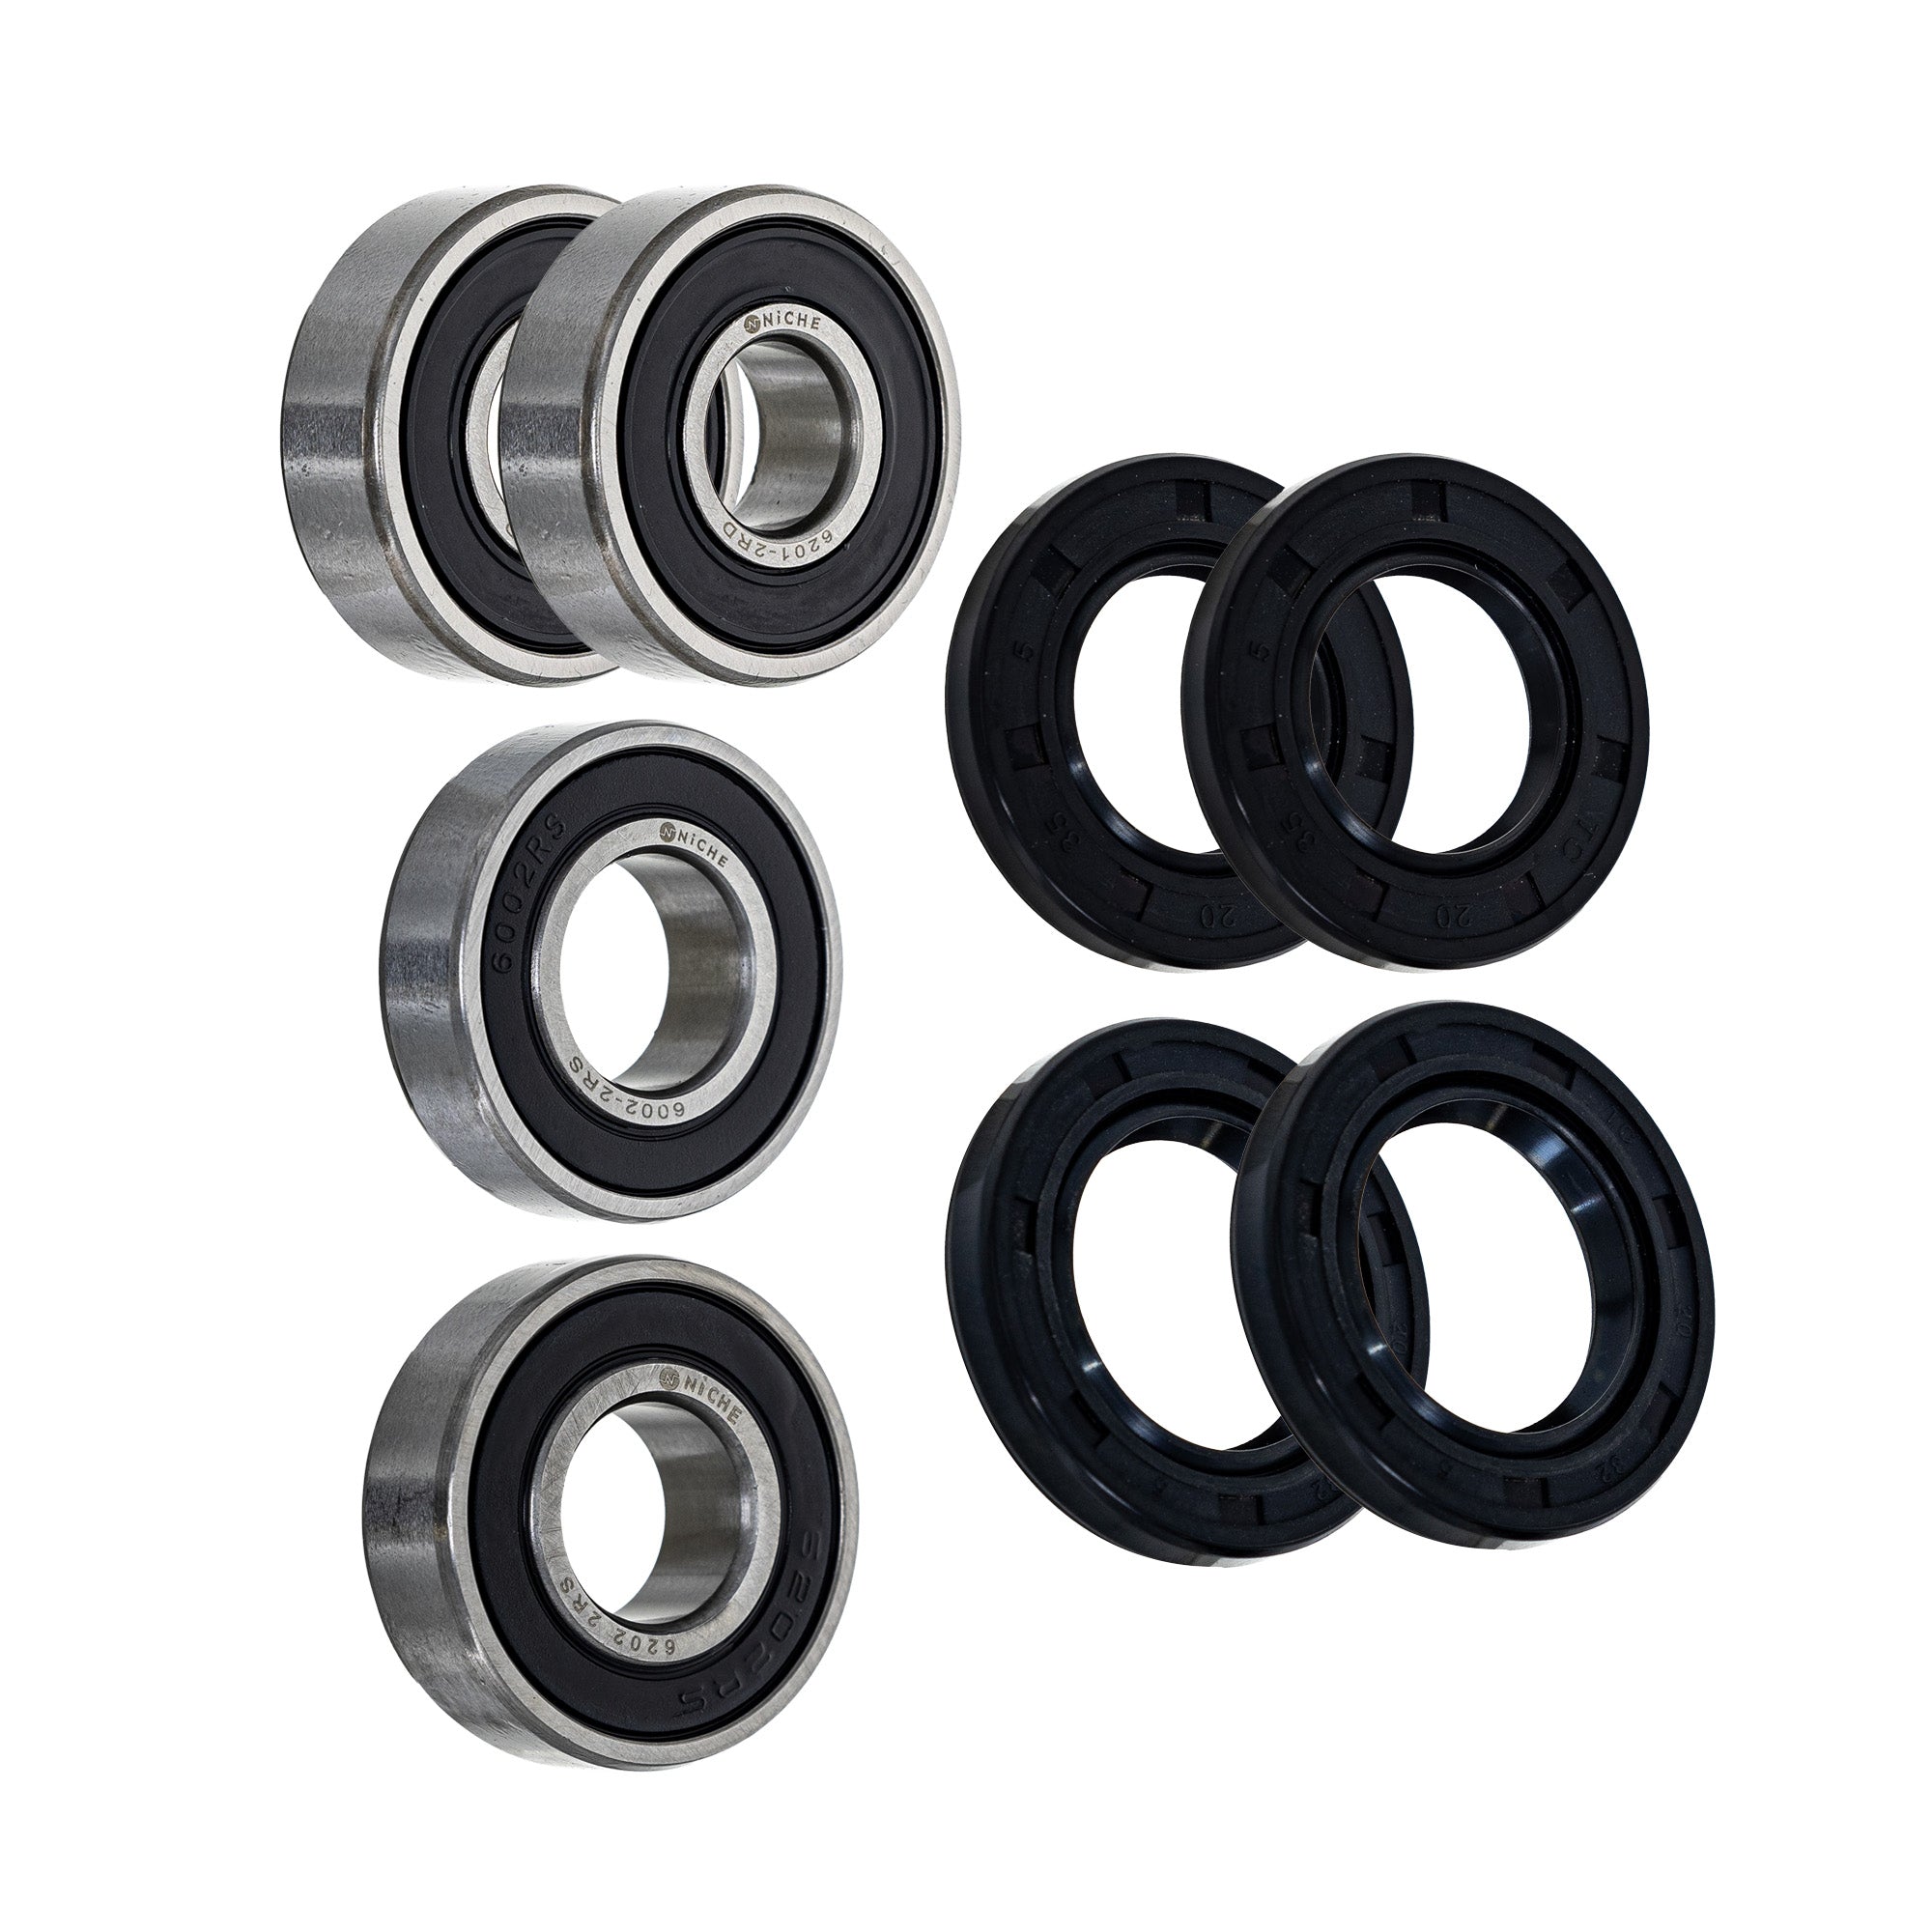 Wheel Bearing Seal Kit for zOTHER Ref No YZ85 YZ80 NICHE MK1008701